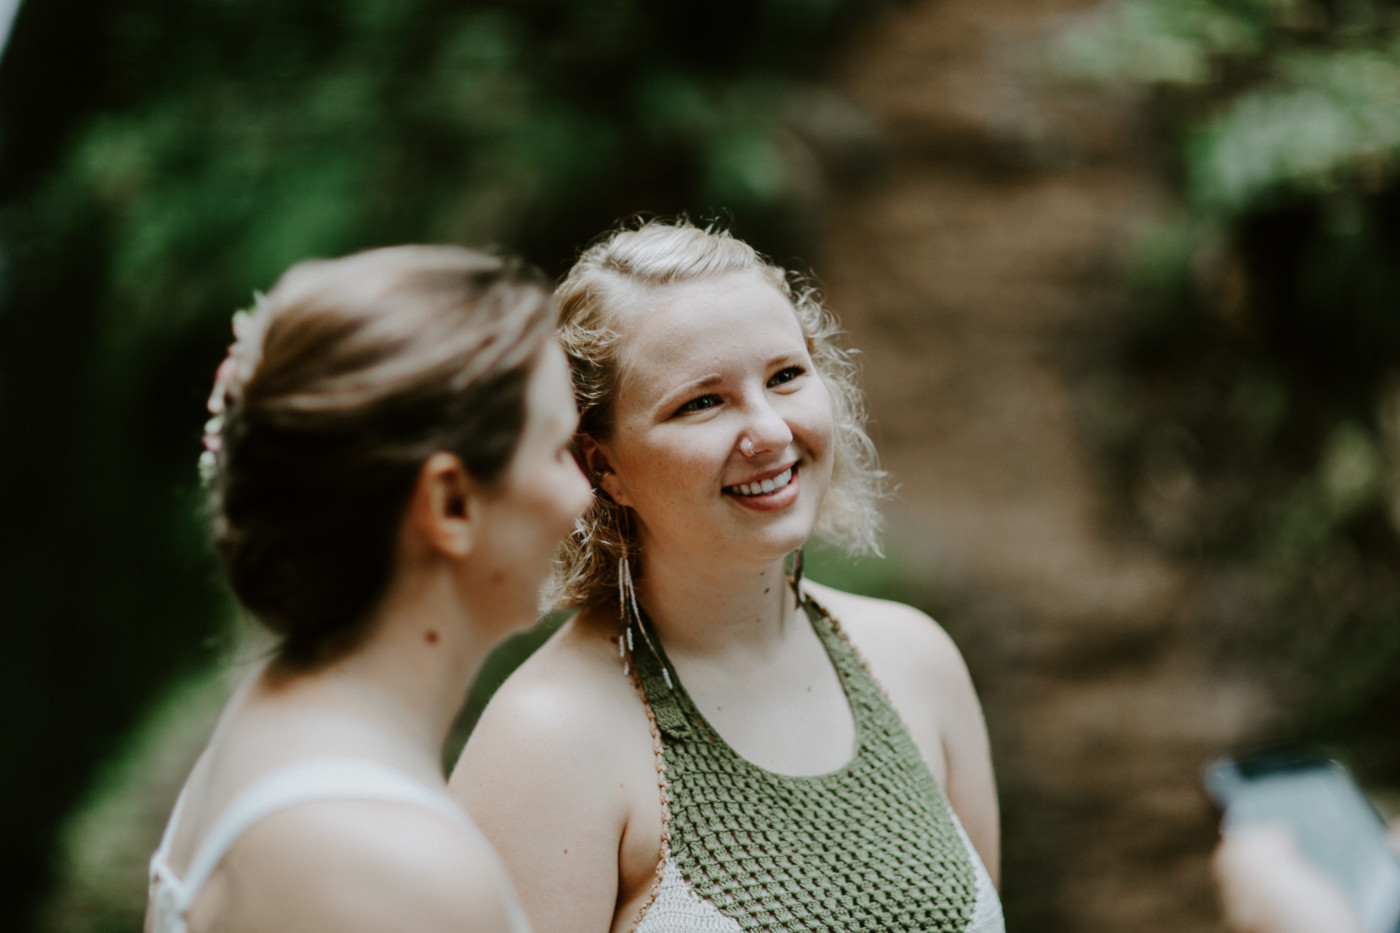 Kate listens to her mom officiate her elopement. Elopement wedding photography at Bridal Veil Falls by Sienna Plus Josh.